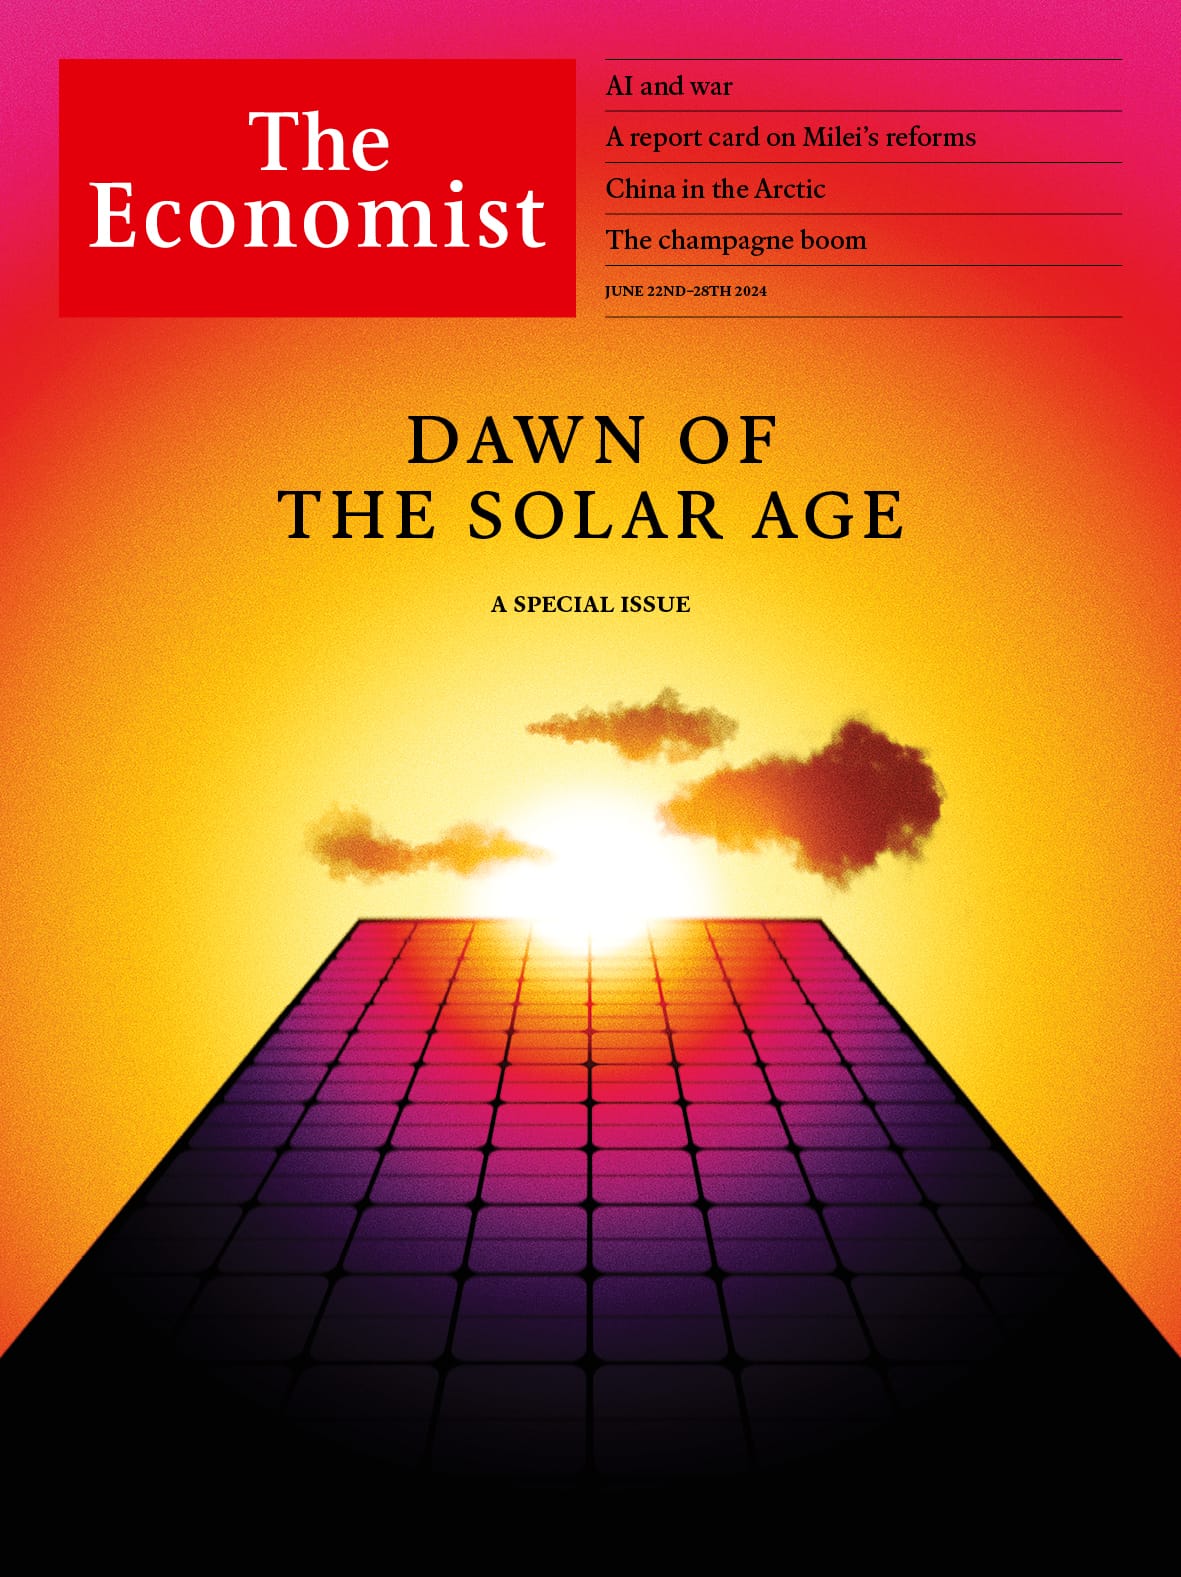 The Dawn of the Solar Age, Same Sex Marriage in Thailand, and Nature Restoration in Europe